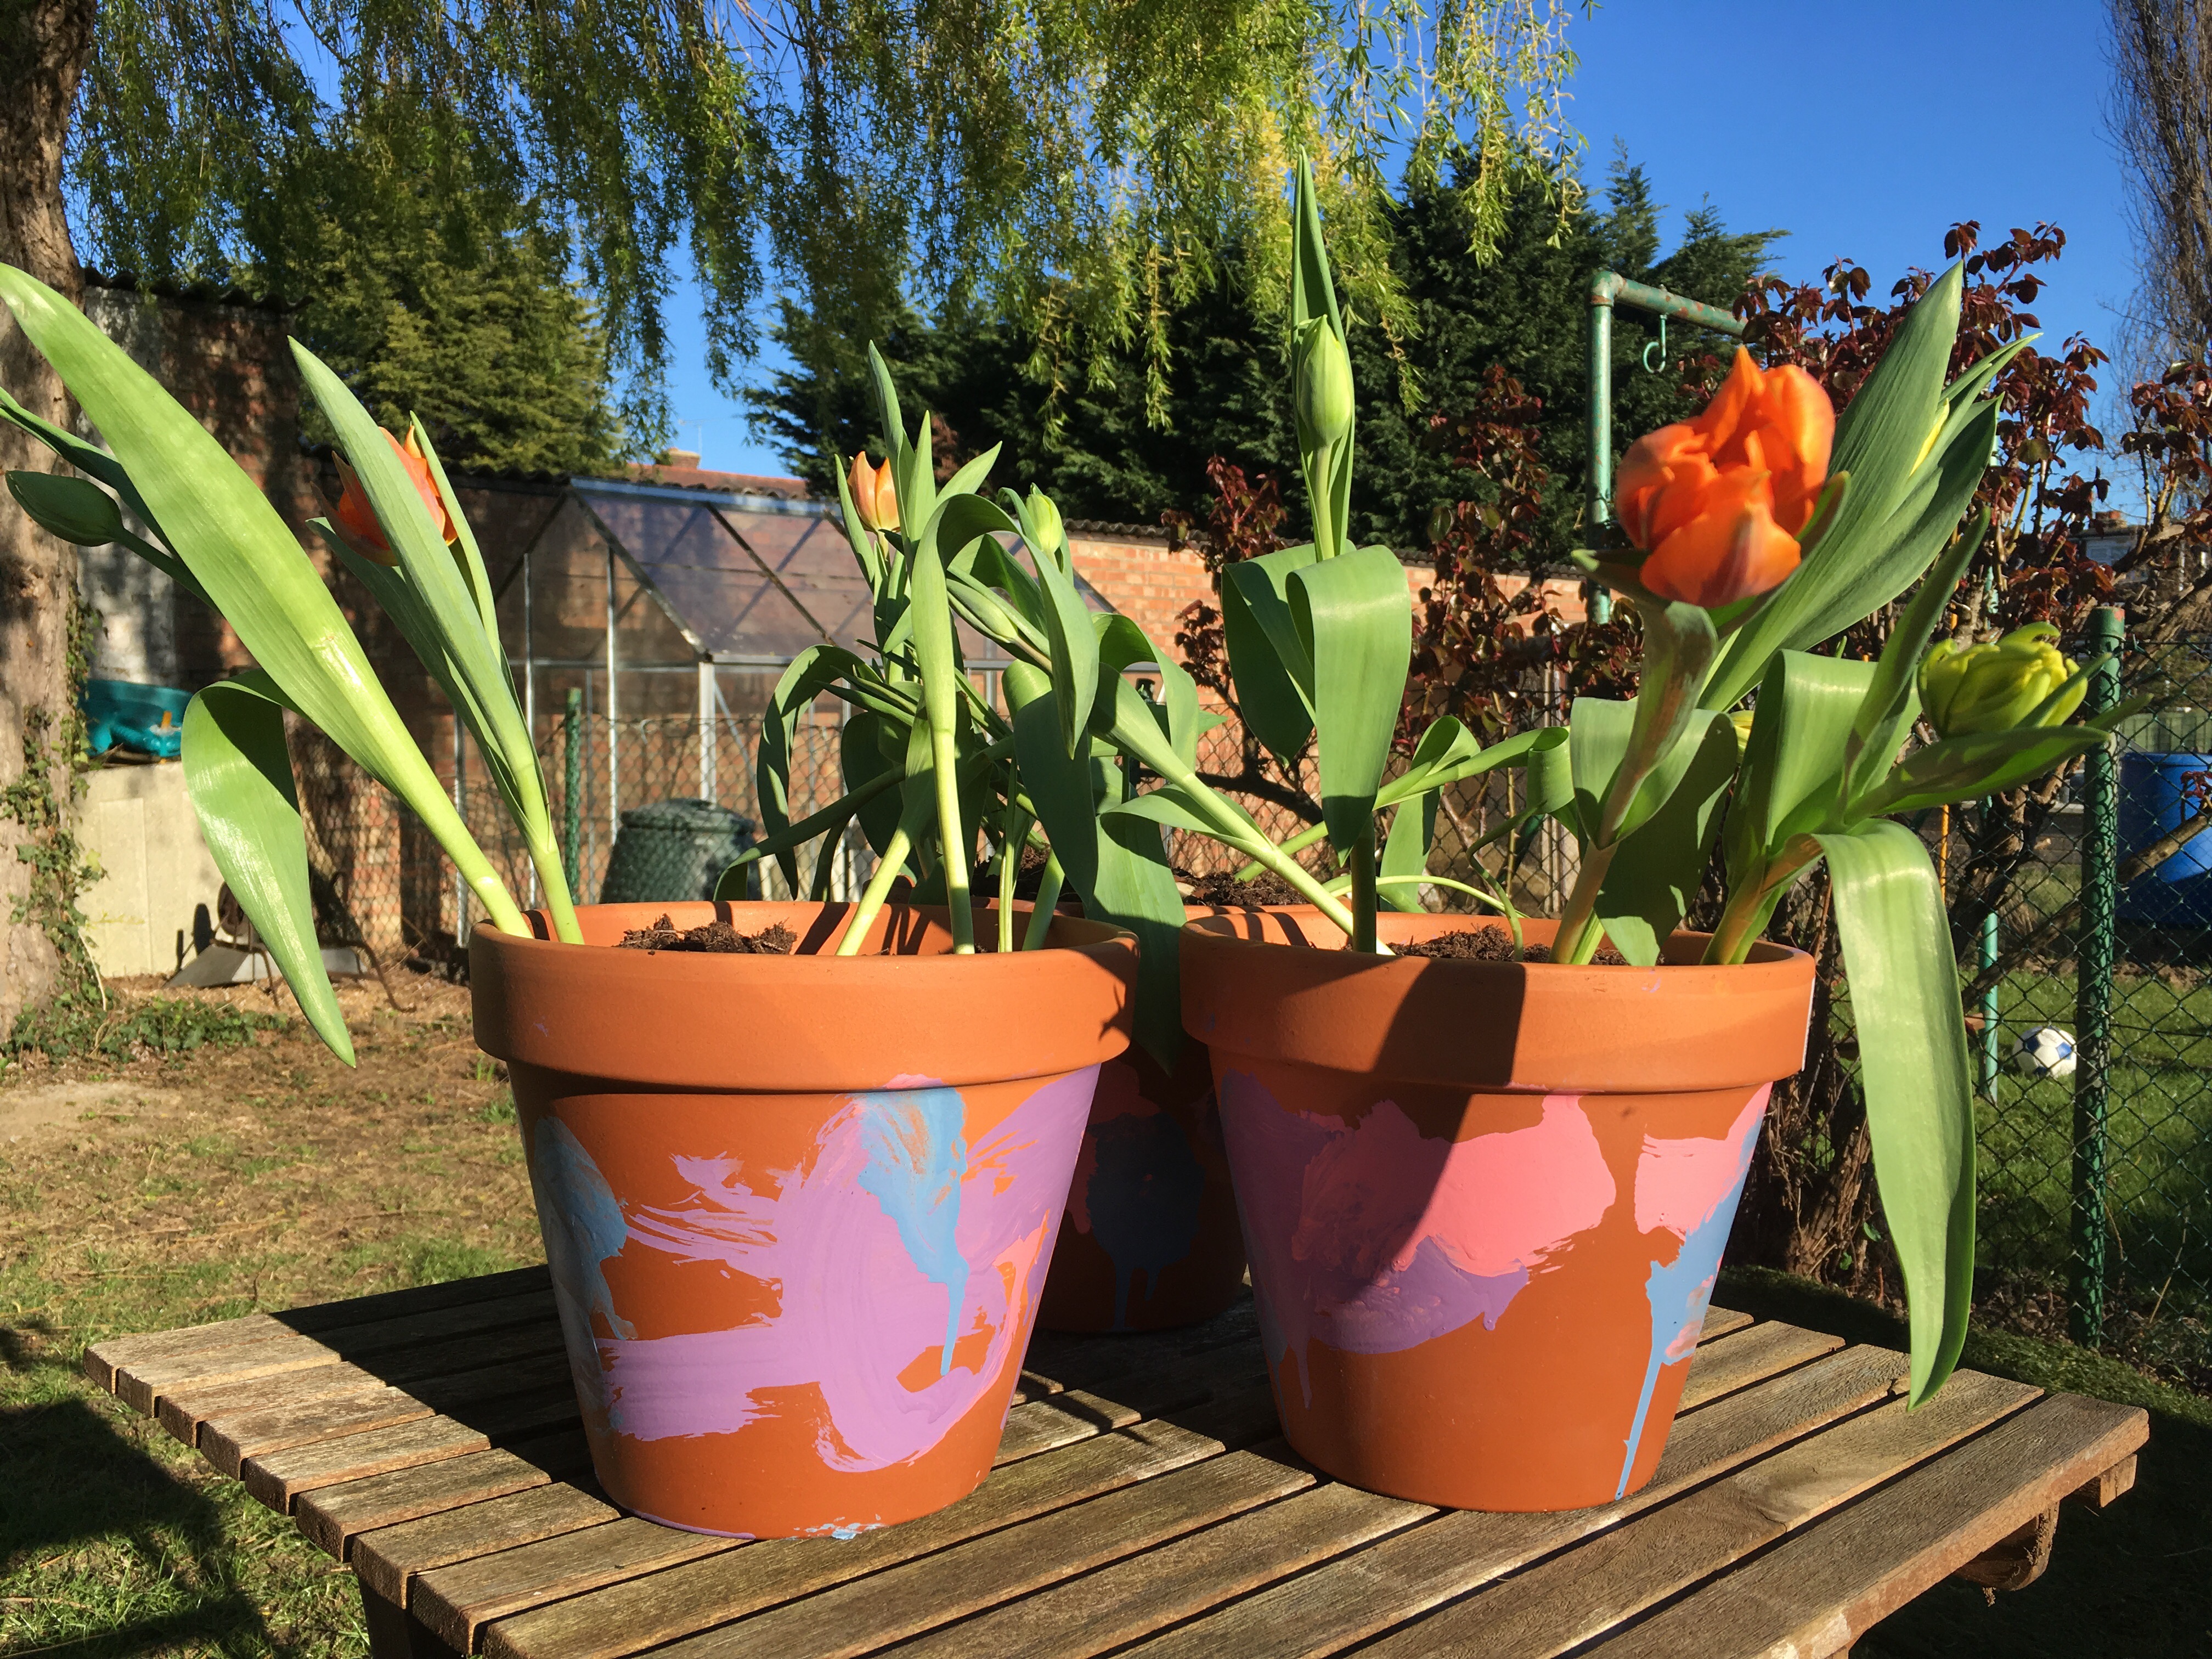 Painted Plant Pots for Mother's Day.